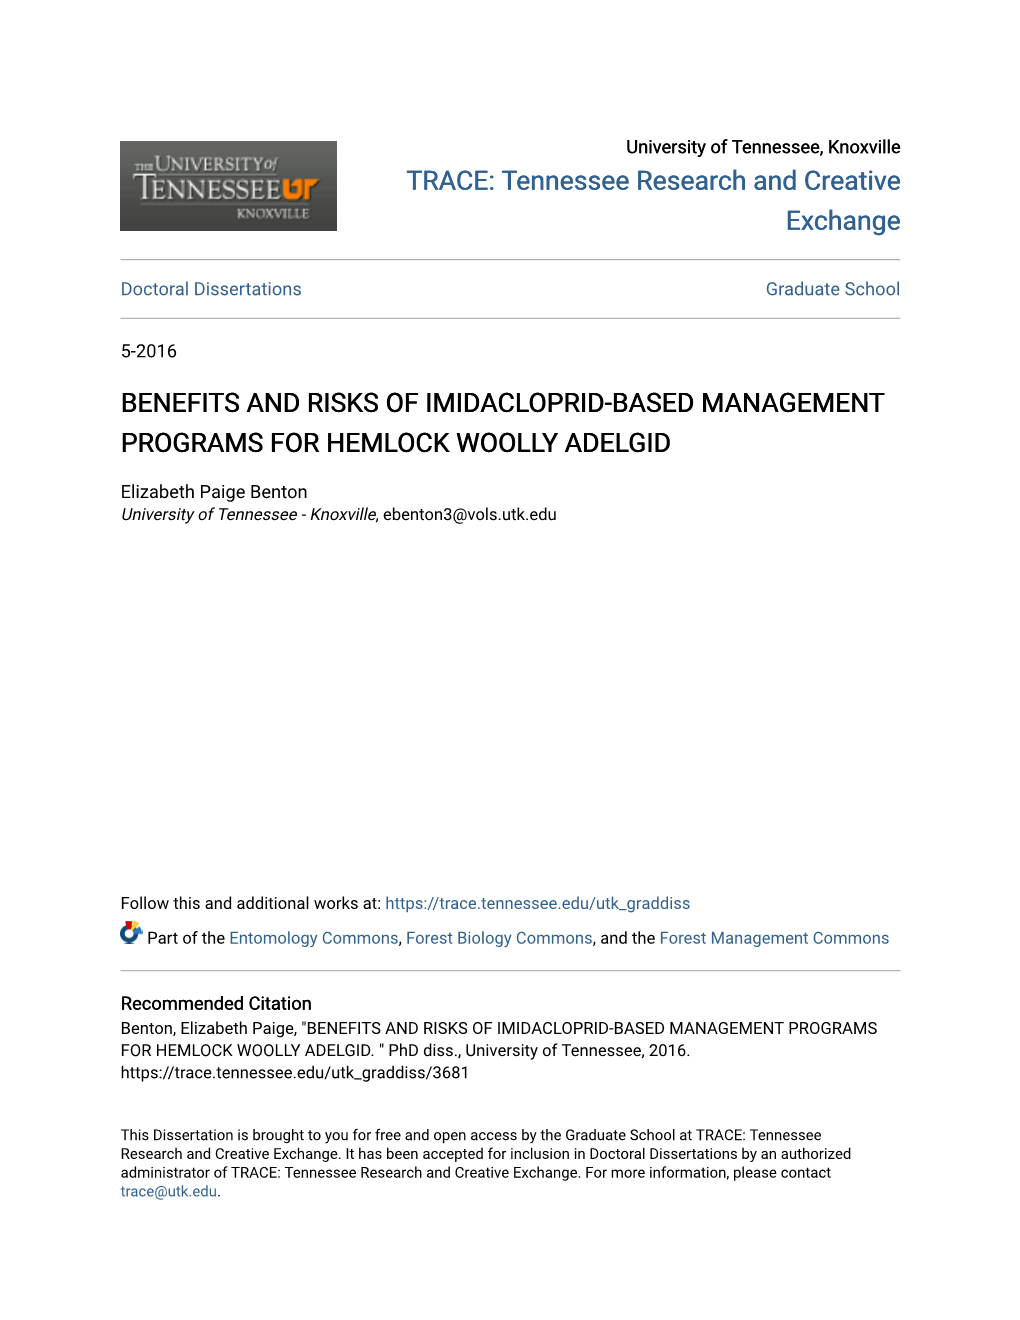 Benefits and Risks of Imidacloprid-Based Management Programs for Hemlock Woolly Adelgid